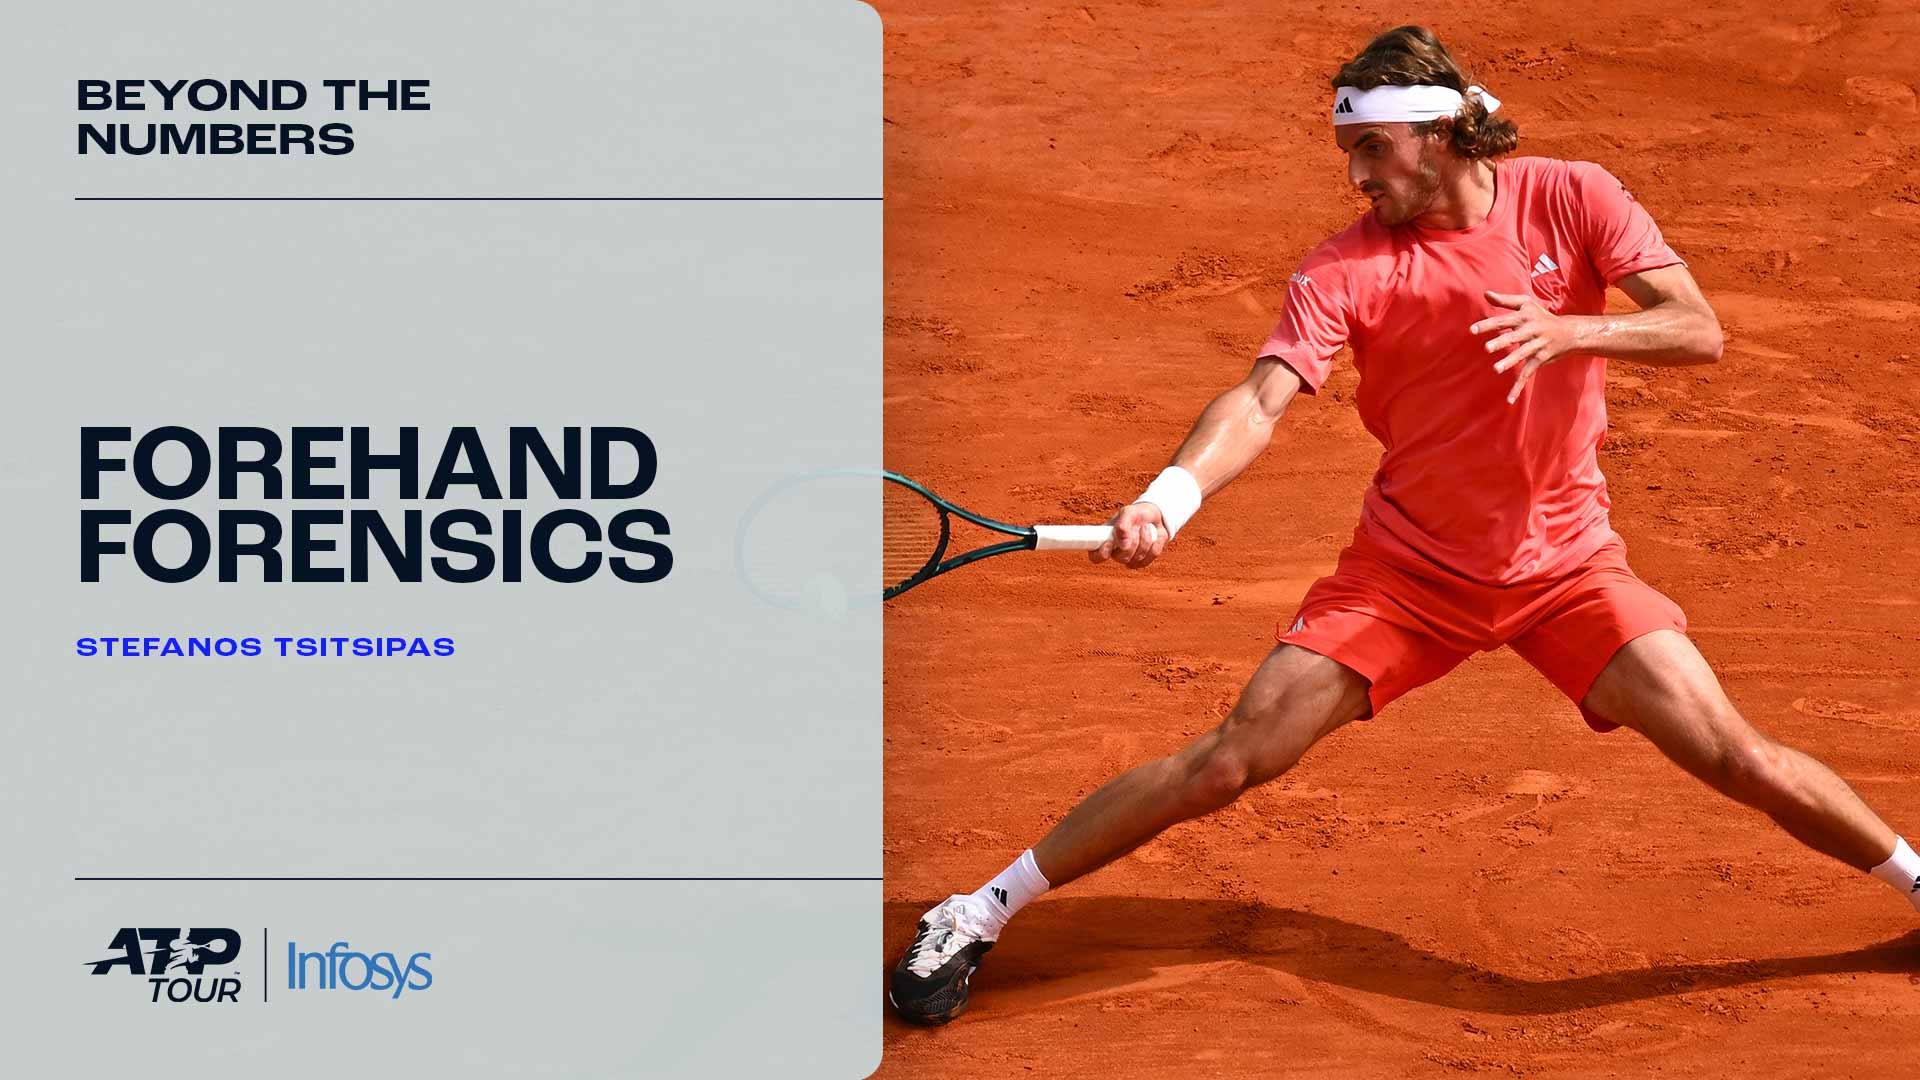 Tsitsipas' forehand punch: How early offense fuels the Greek's attack